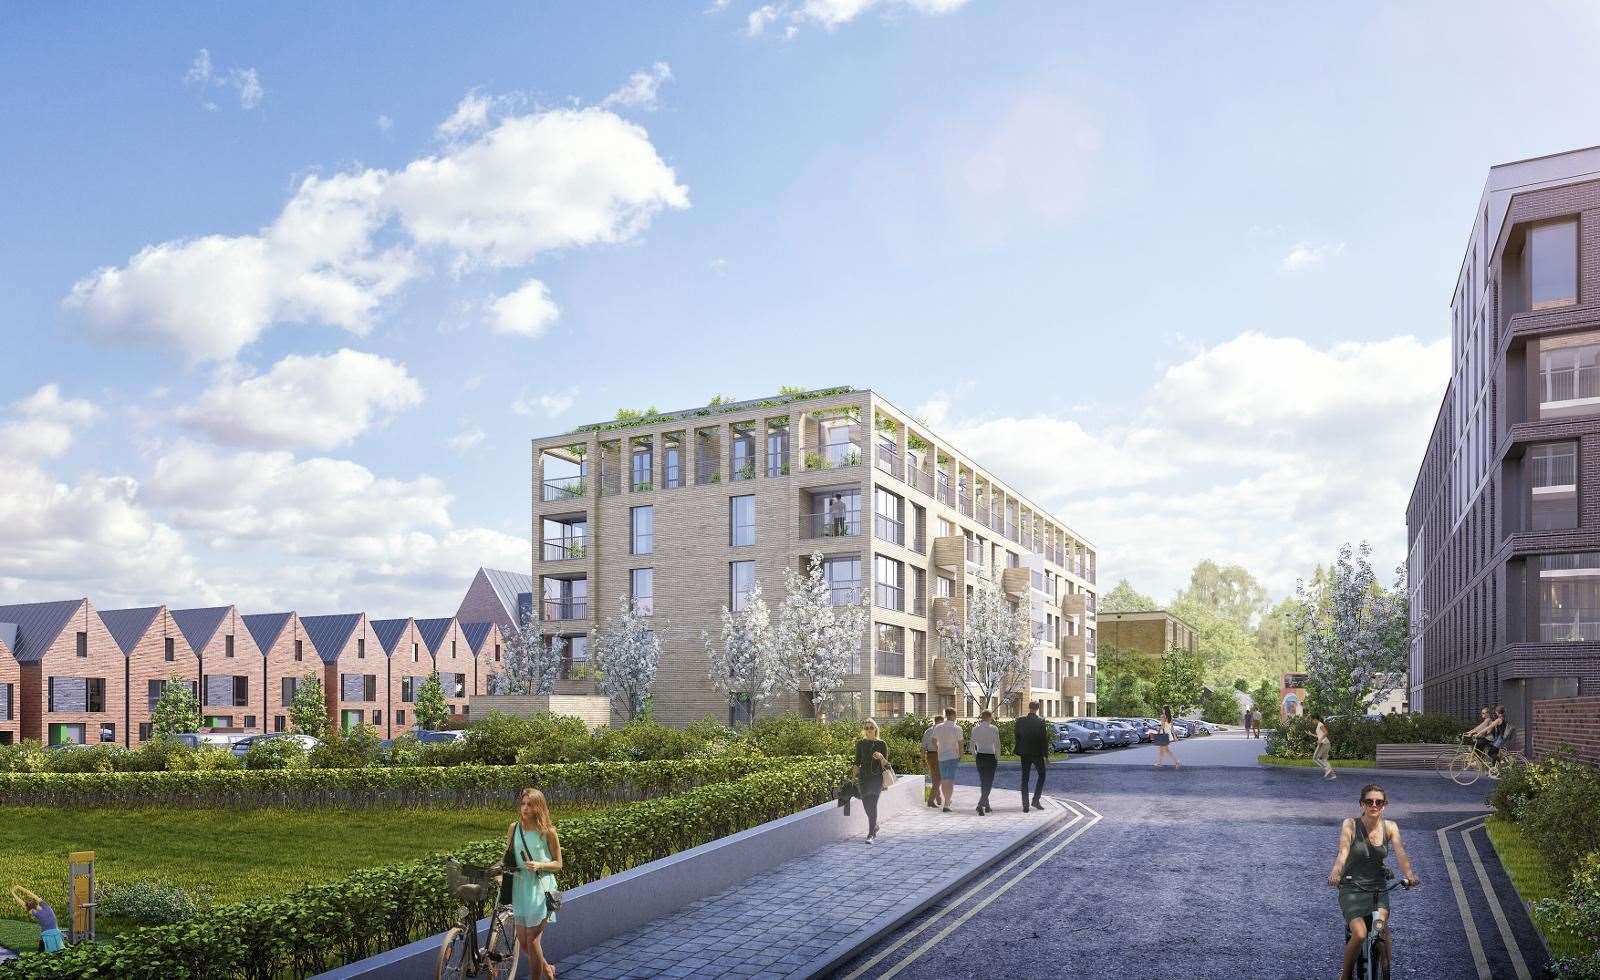 The residential buildings due to be built at Kingsmead